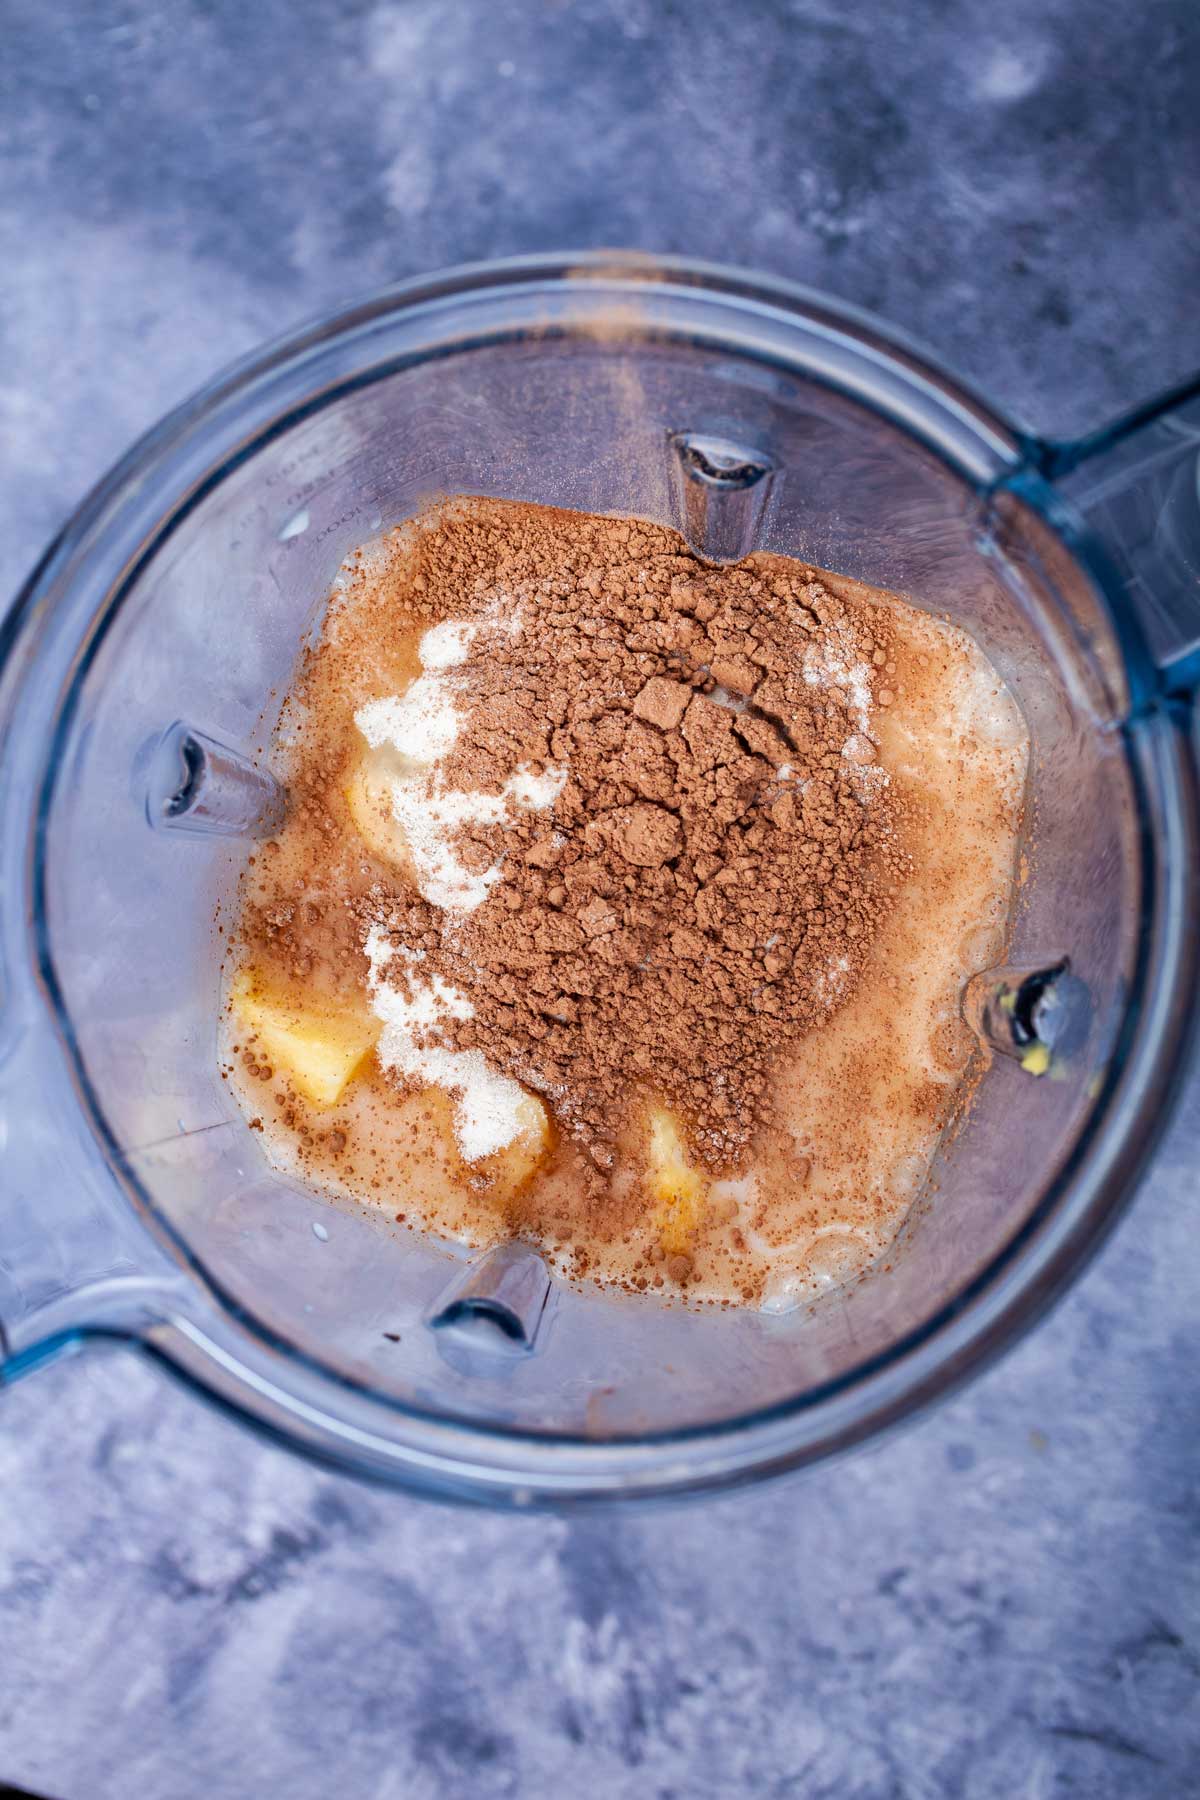 Almond milk, pineapple, collagen powder, and cacao powder in a blender.